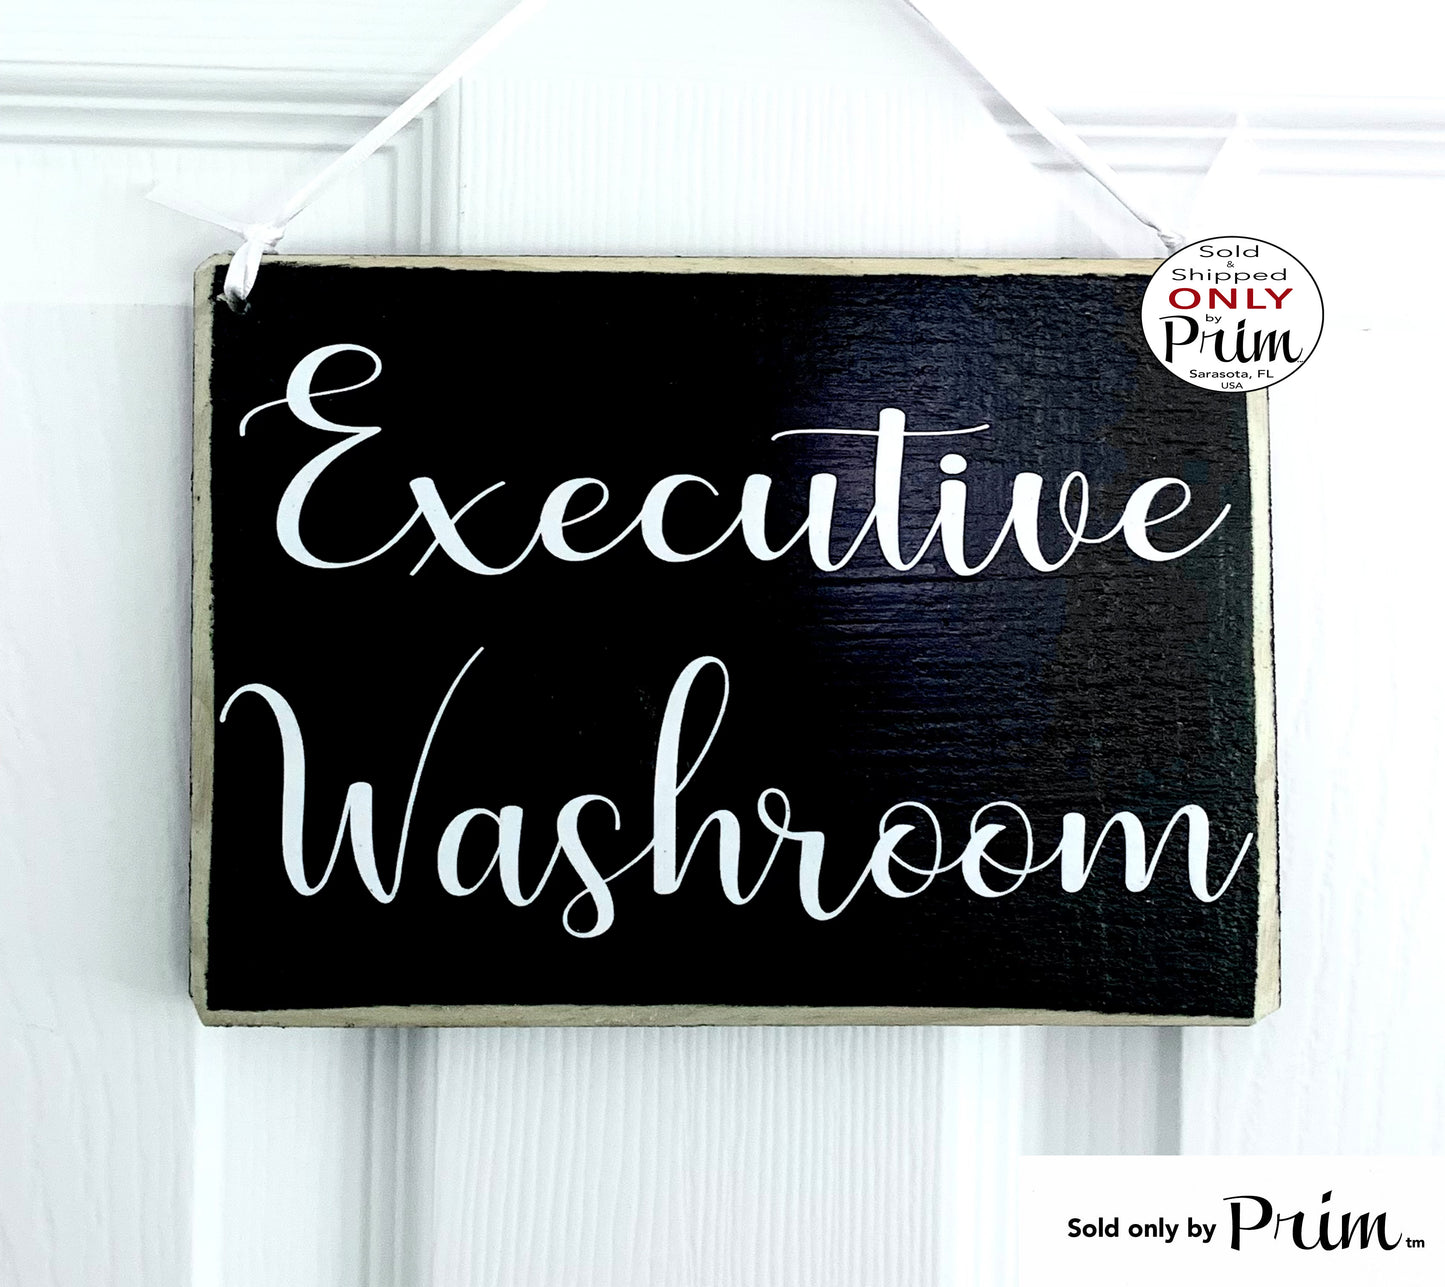 Designs by Prim 8x6 Executive Washroom Custom Wood Sign | Employees Only Restroom WC Loo Business Store Shop Women Men Wall Door Plaque | Private Hanger